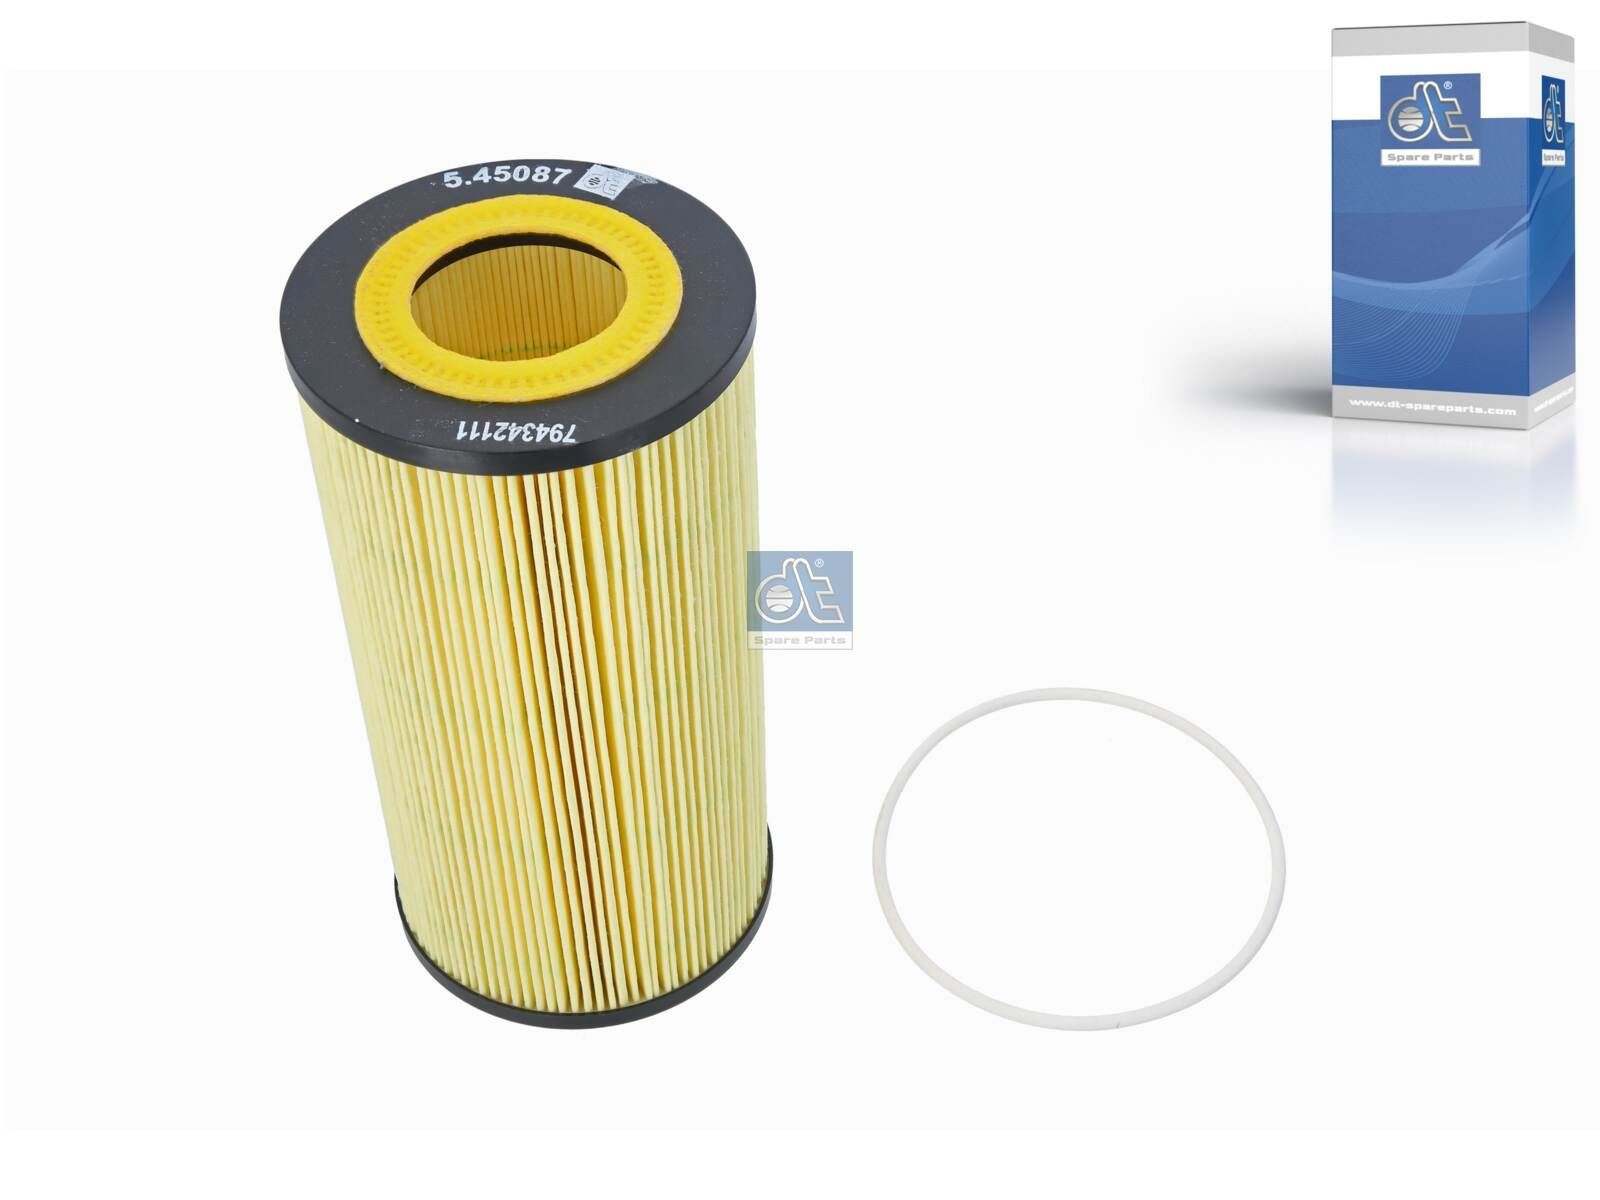 HU 12 103 x DT Spare Parts 5.45087 Oil filter 7424993649